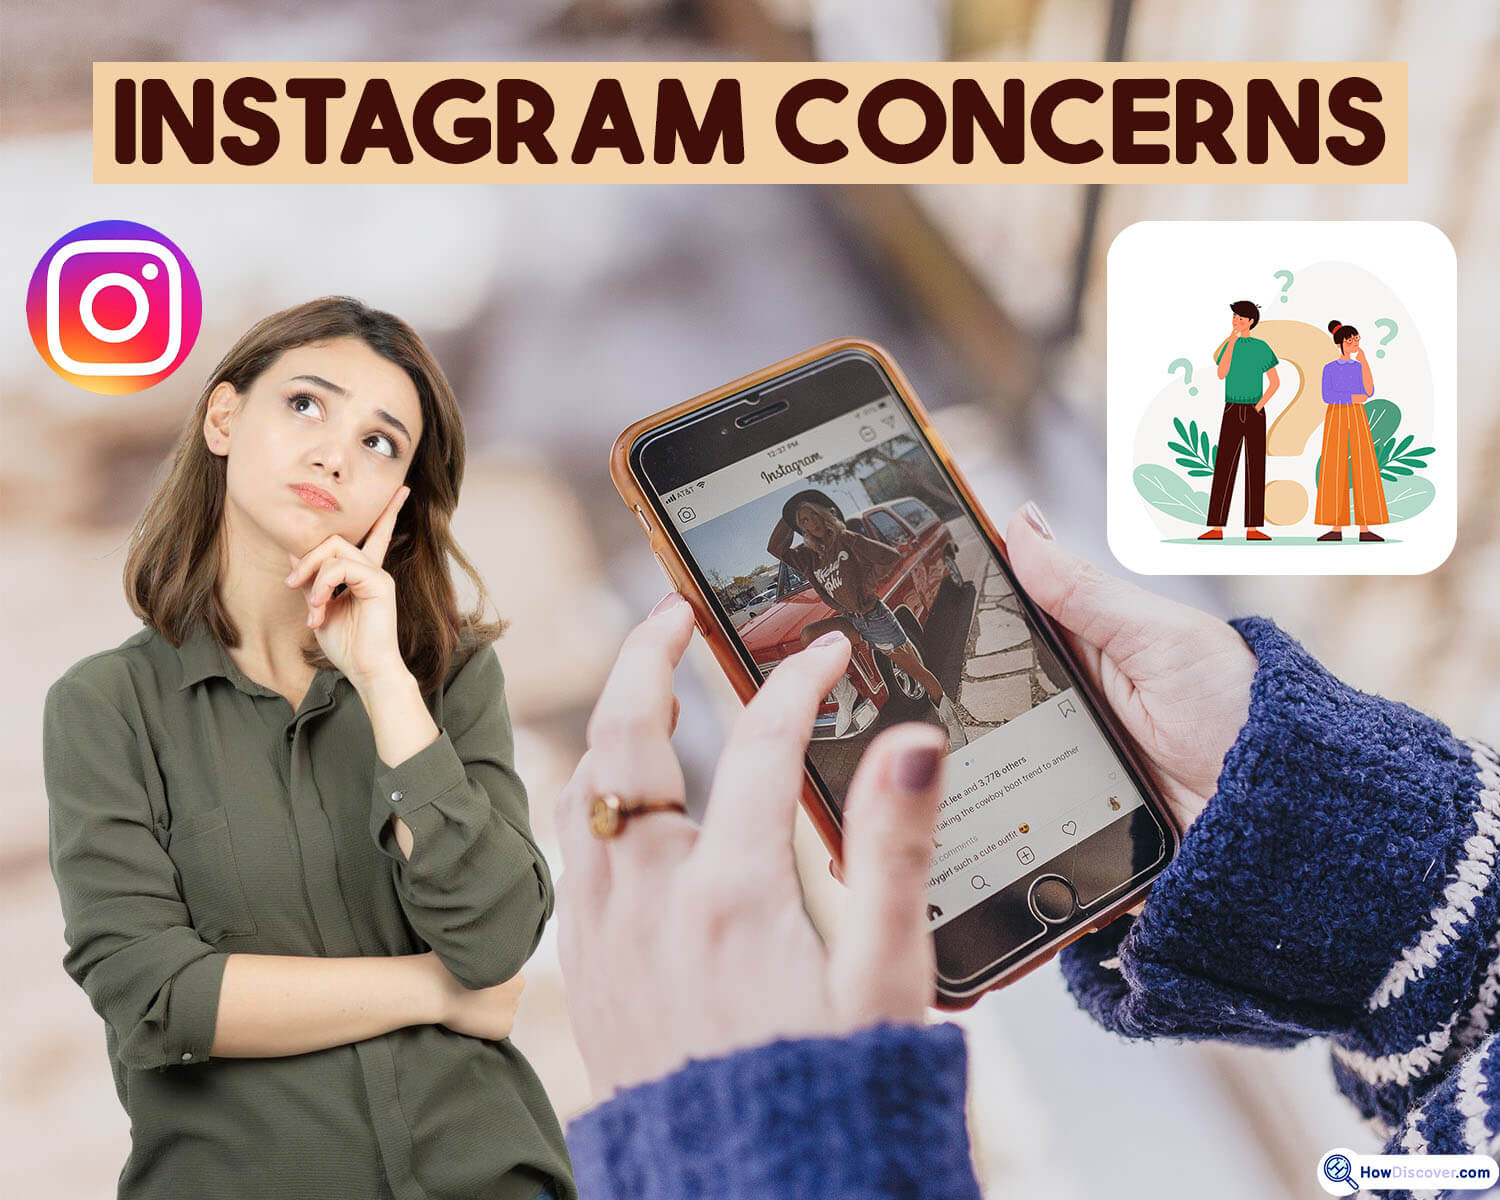 What are the concerns about Instagram? - What Are The Instagram Alternatives